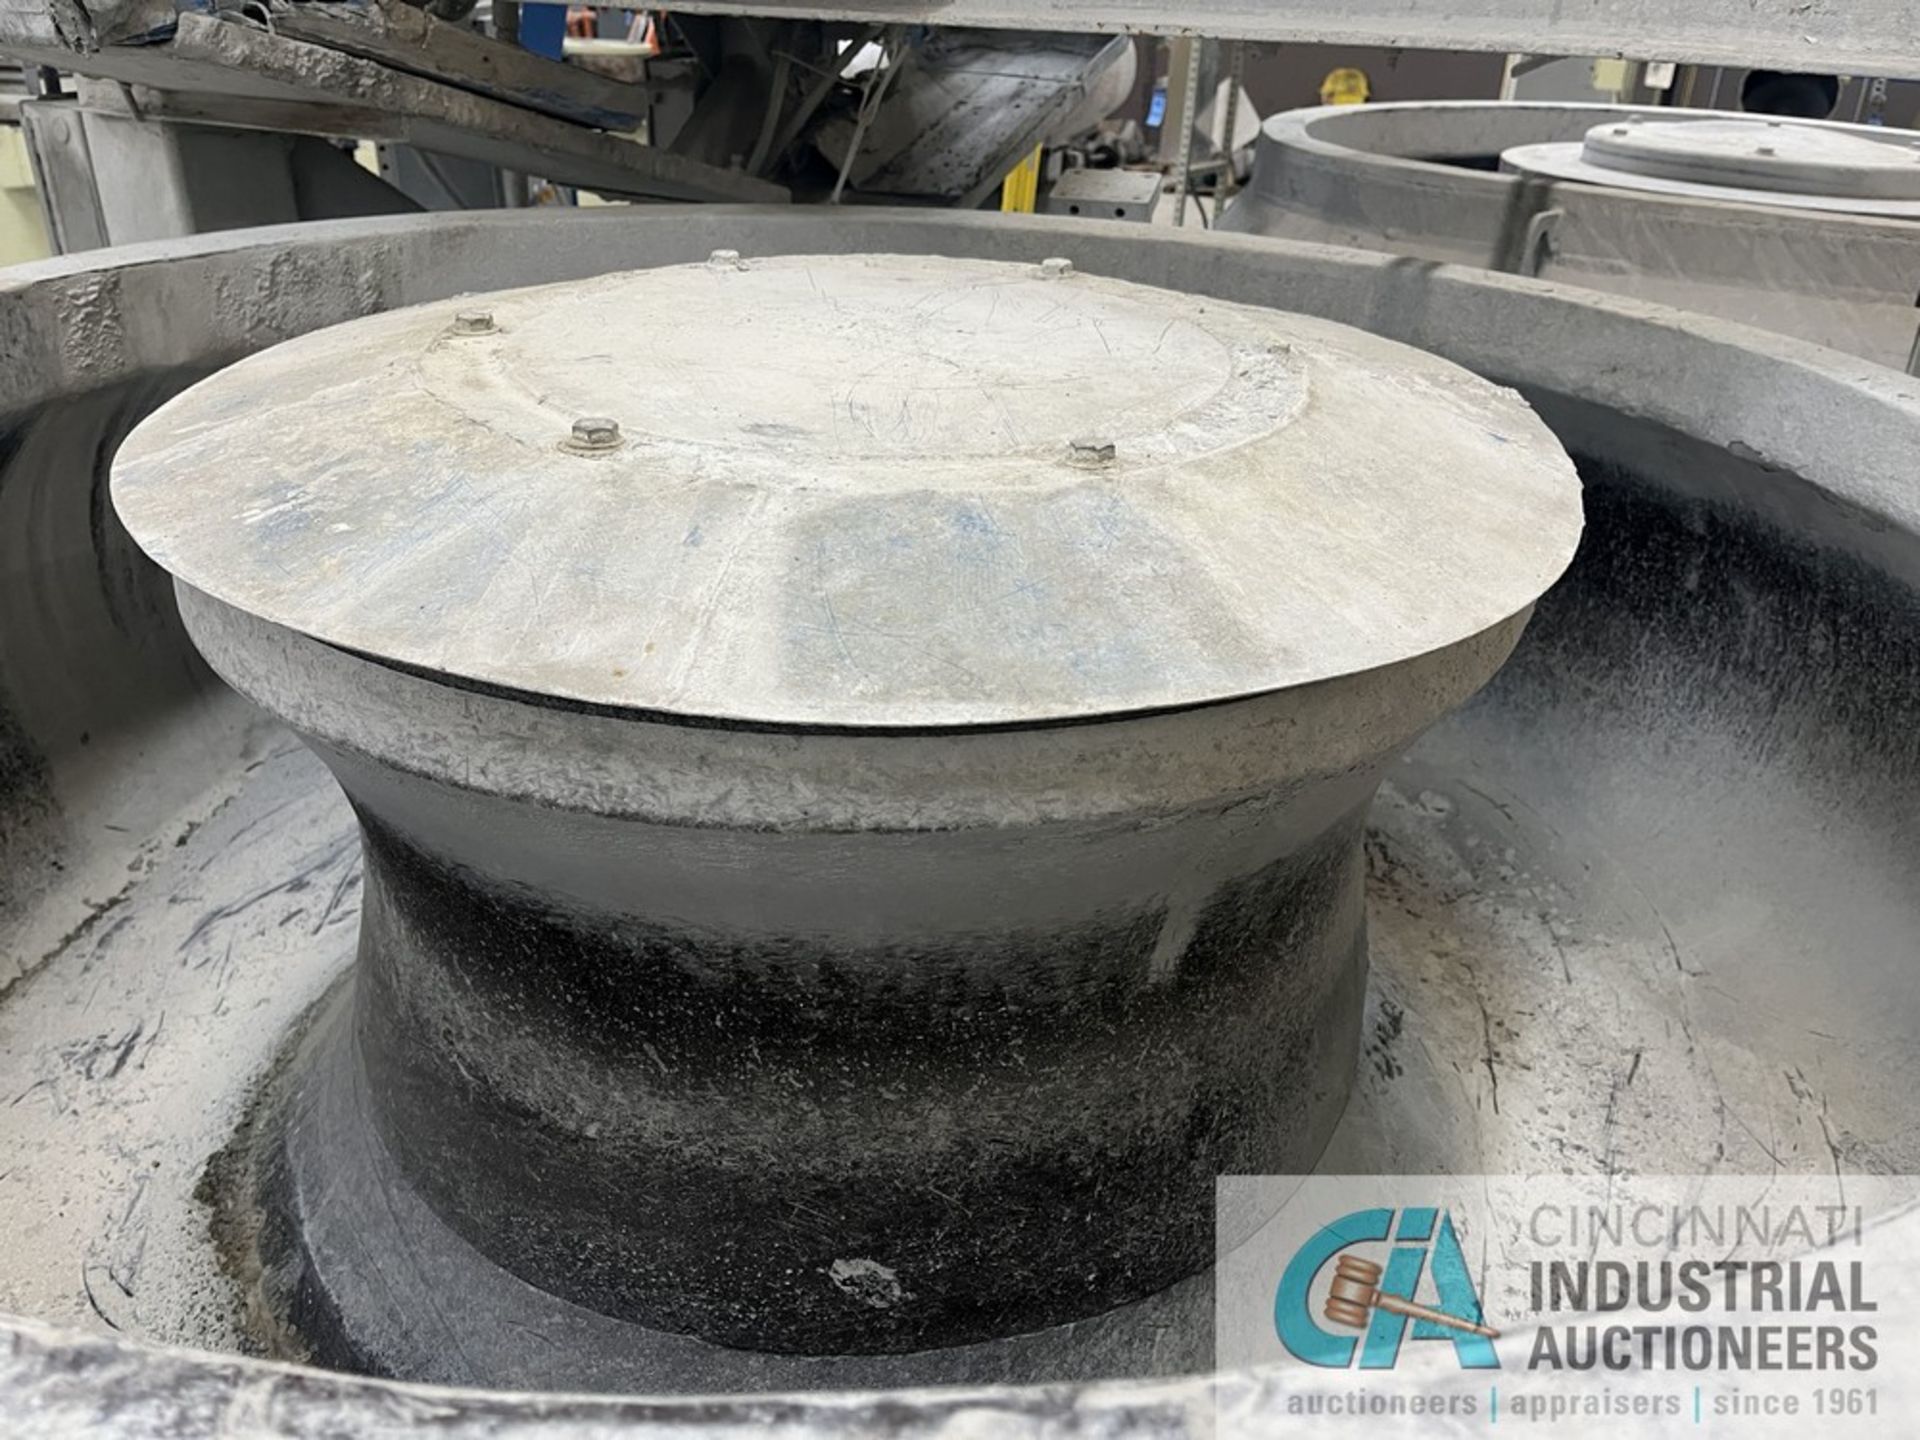 56" DIAMETER / 23 CUBIC FOOT ALMCO VIBRATORY FINISHING BOWL **SUBJECT TO OVERALL BID** - Image 6 of 8